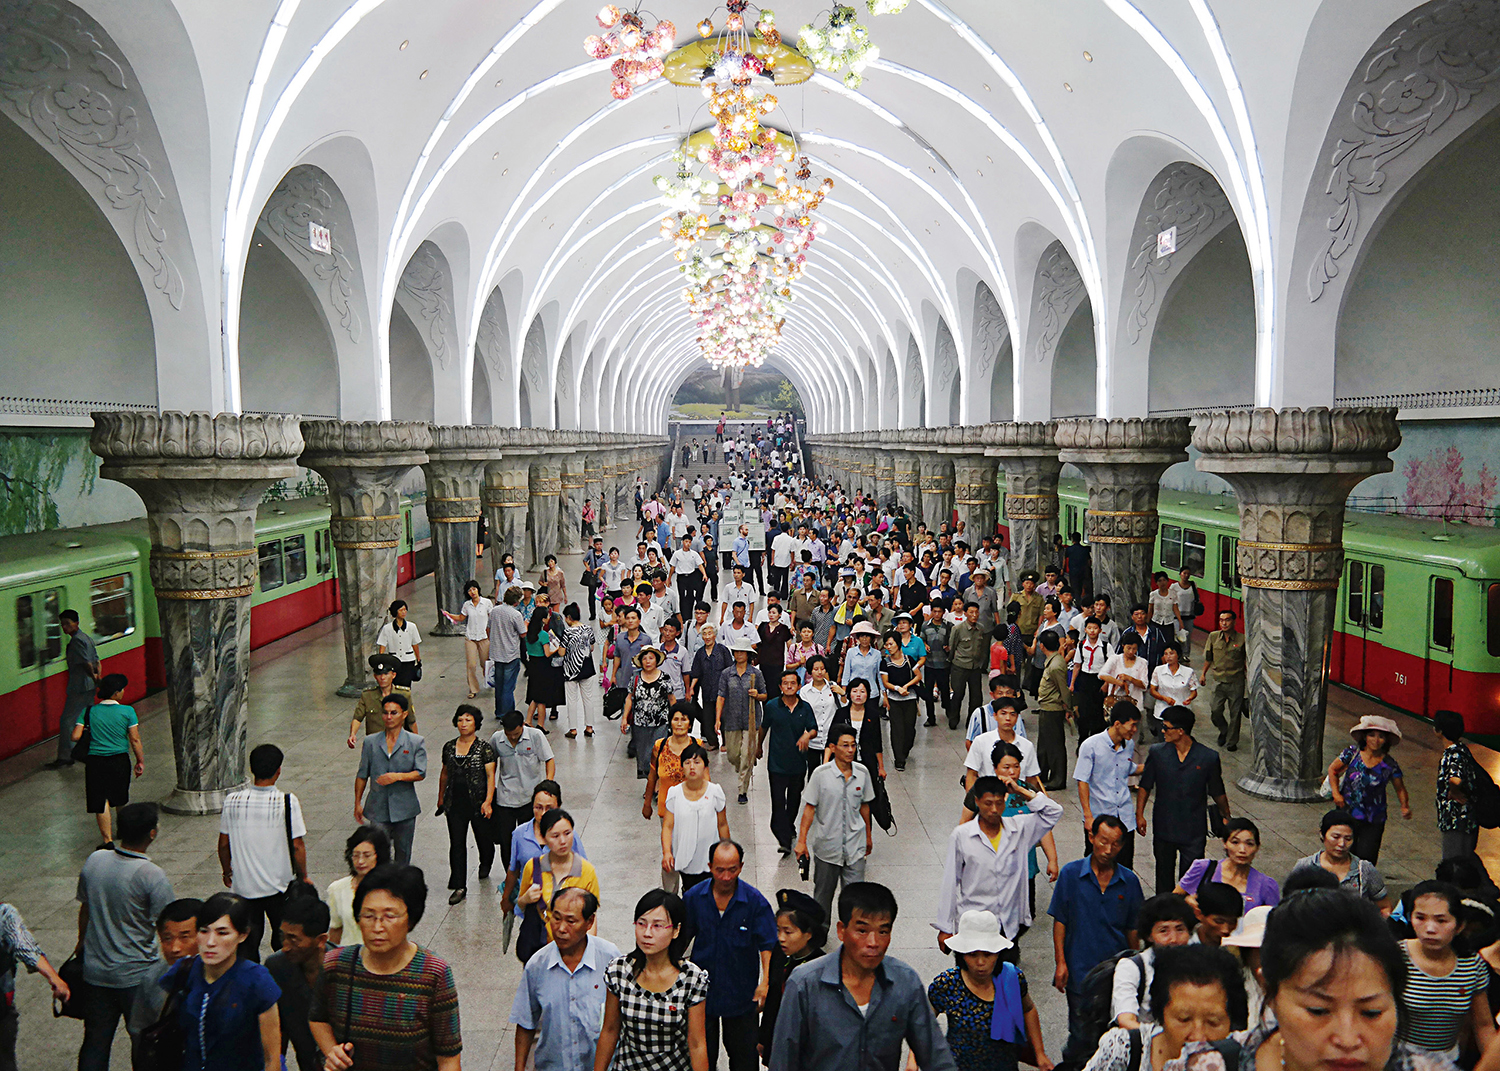 Yonggwang metro was constructed in 1965. It baroque inspired arches and ornate marble and granite flourishes are inspired by Moscow's underground railway system